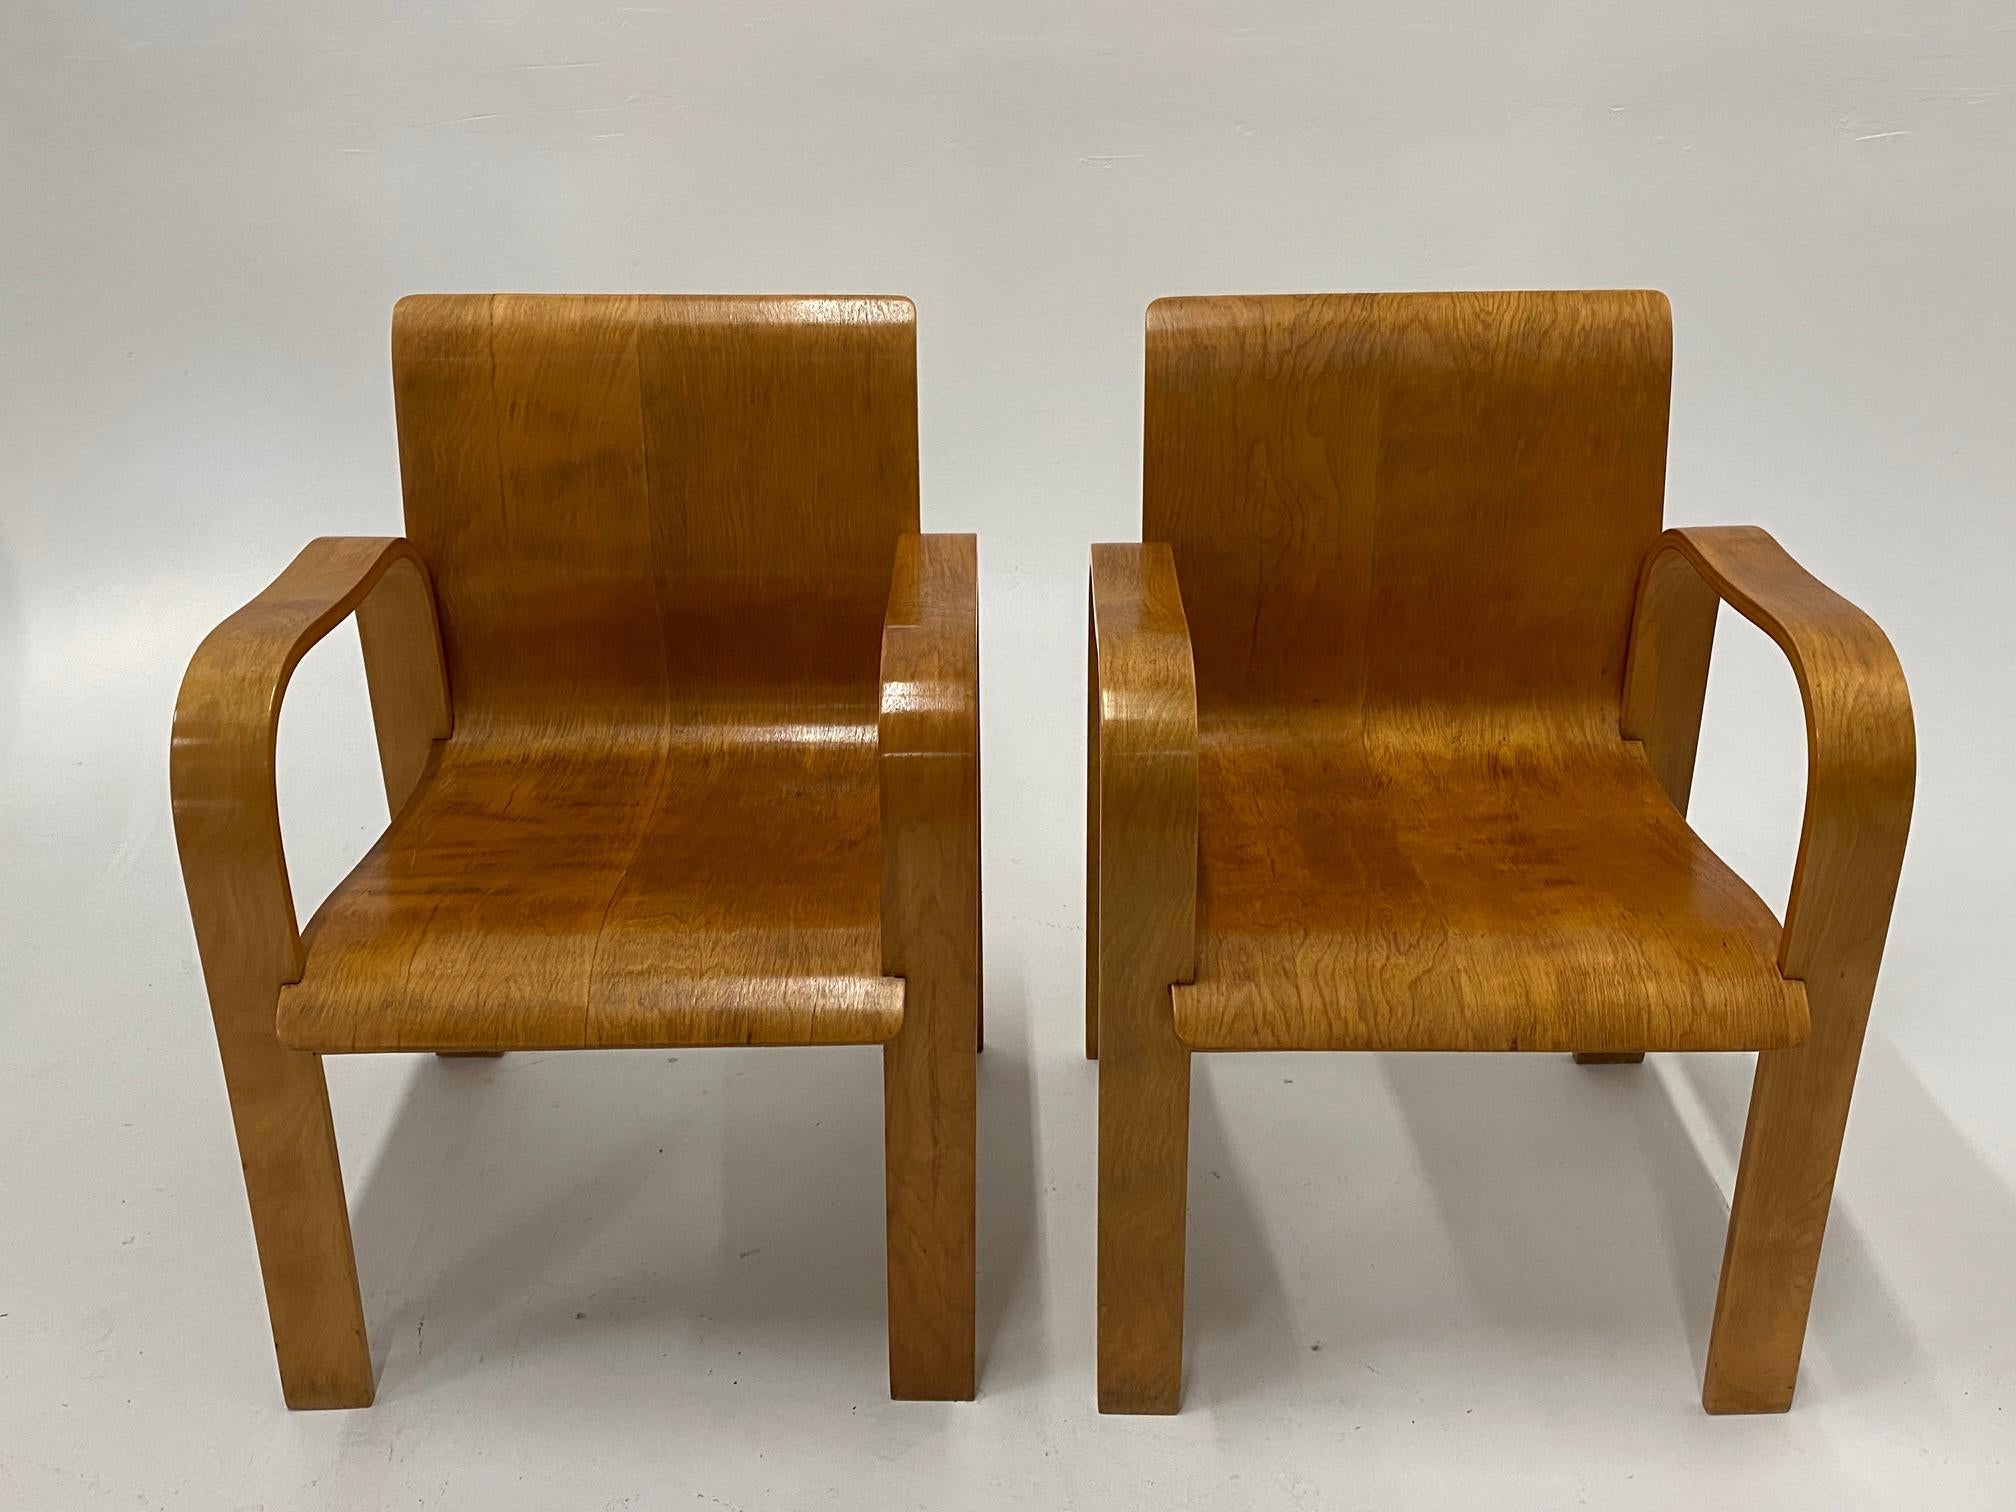 Rare Pair of Sleek Molded Plywood Mid-Century Modern Armchairs For Sale 3